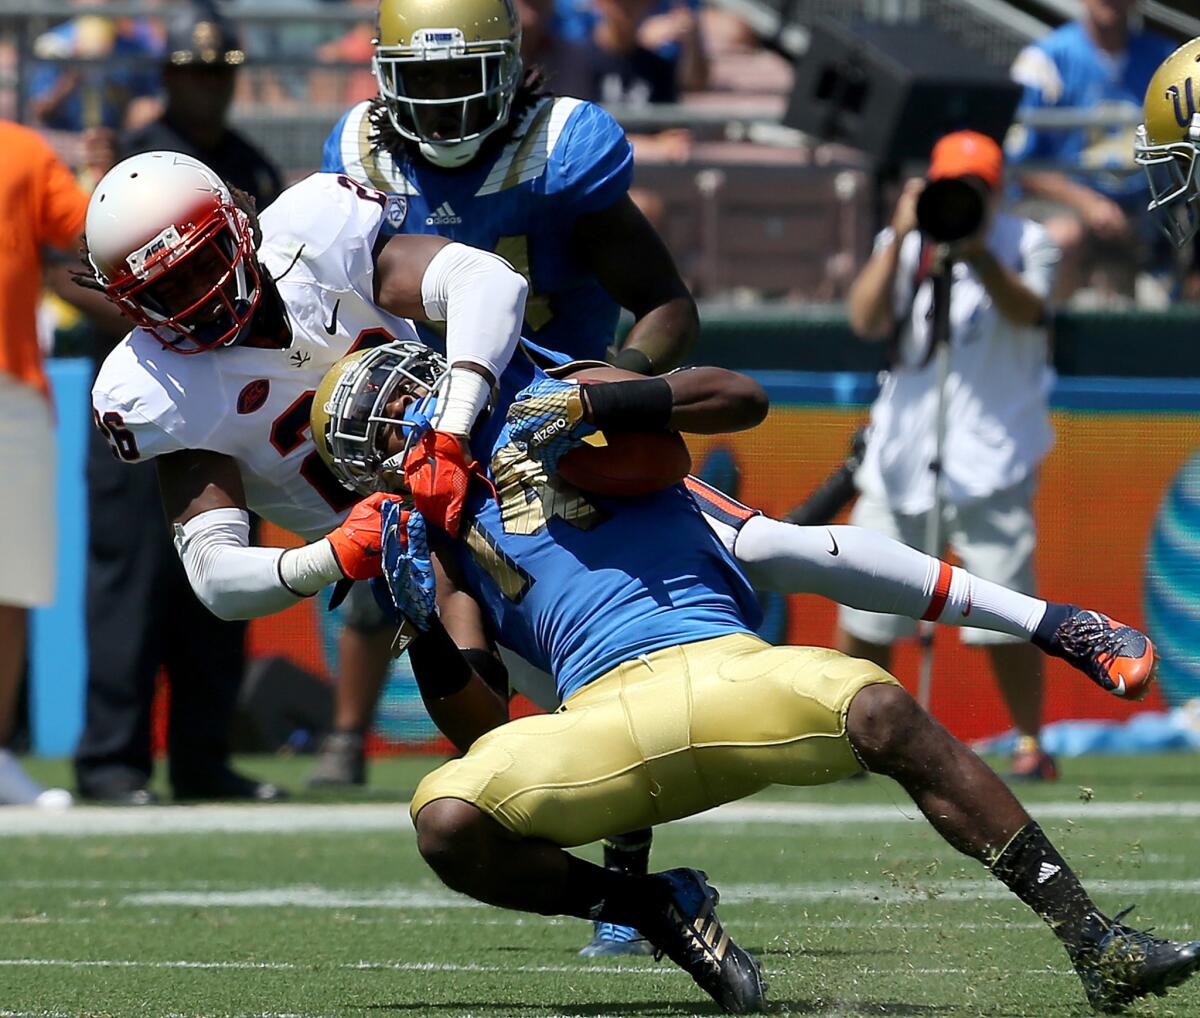 UCLA receiver Mossi Johnson hauls in a pass against the defense of Virginia cornerback Maurice Canady in the first half Saturday afternoon at the Rose Bowl.